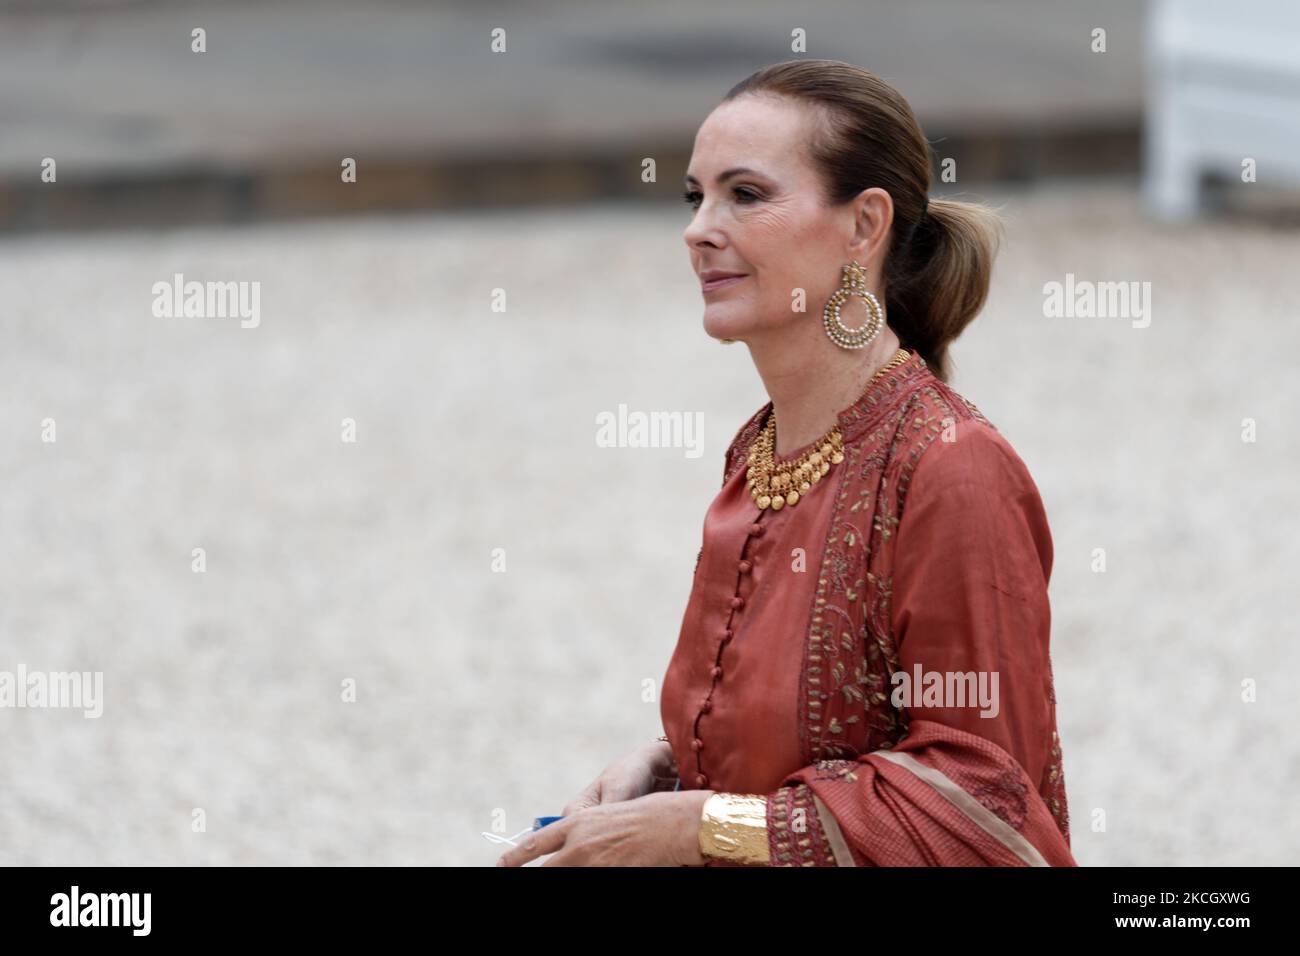 Actress Carole Bouquet arrives for state diner with Italian President Sergio Mattarella and his daughter Laura Mattarella and French President Emmanuel Macron and his wife Brigitte Macron at the Elysee Palace in Paris, on July 5, 2021 (Photo by Daniel Pier/NurPhoto) Stock Photo